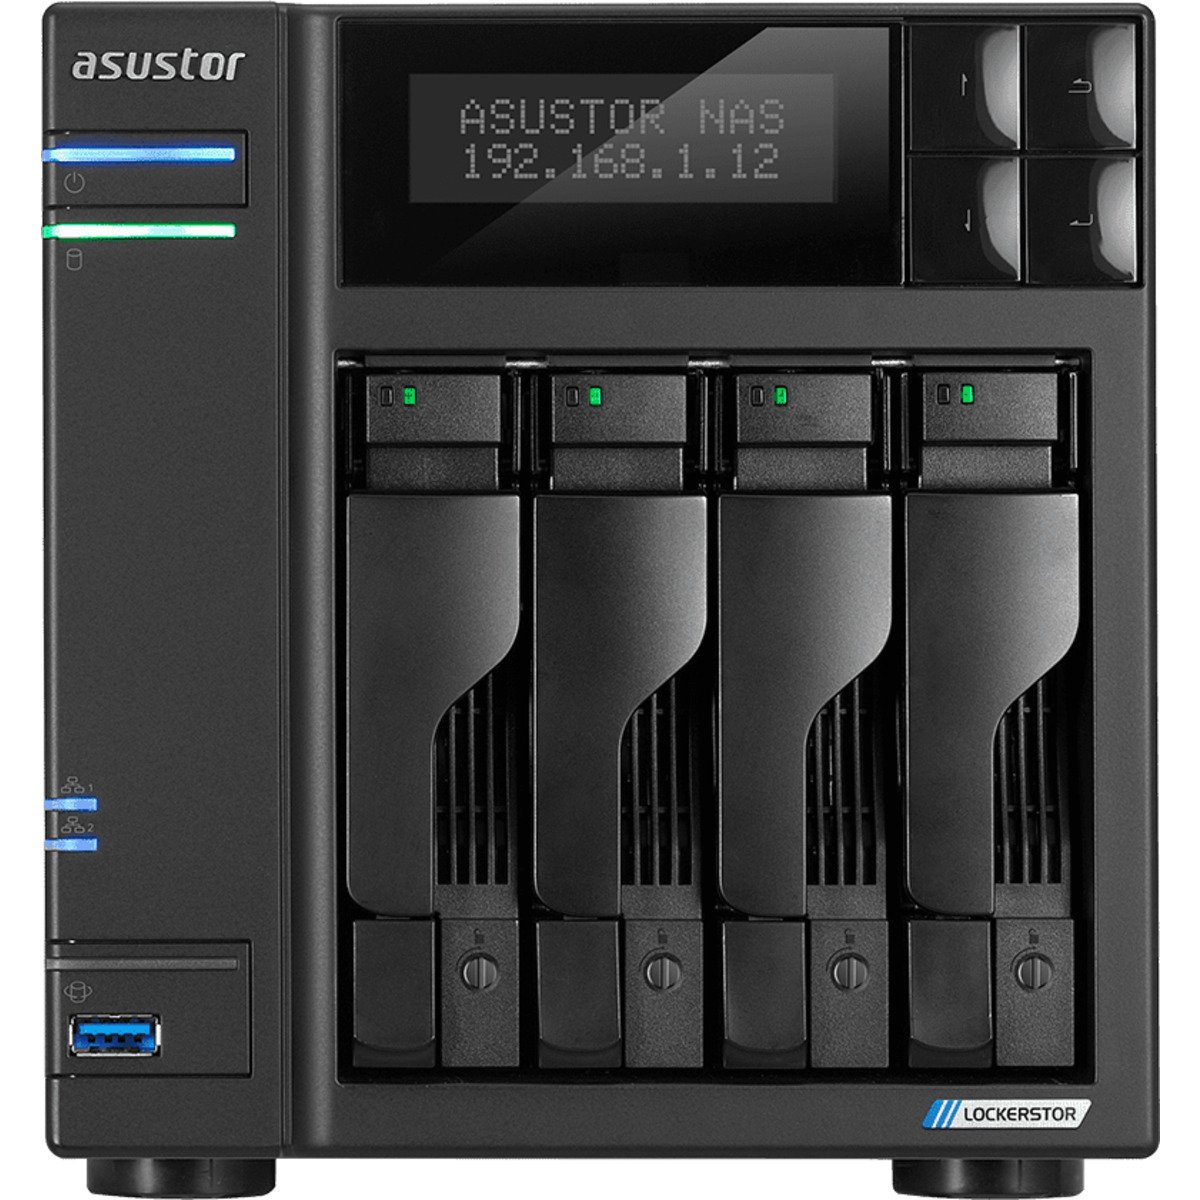 ASUSTOR AS6604T Lockerstor 4 6tb 4-Bay Desktop Multimedia / Power User / Business NAS - Network Attached Storage Device 3x2tb Sandisk Ultra 3D SDSSDH3-2T00 2.5 560/520MB/s SATA 6Gb/s SSD CONSUMER Class Drives Installed - Burn-In Tested - FREE RAM UPGRADE AS6604T Lockerstor 4